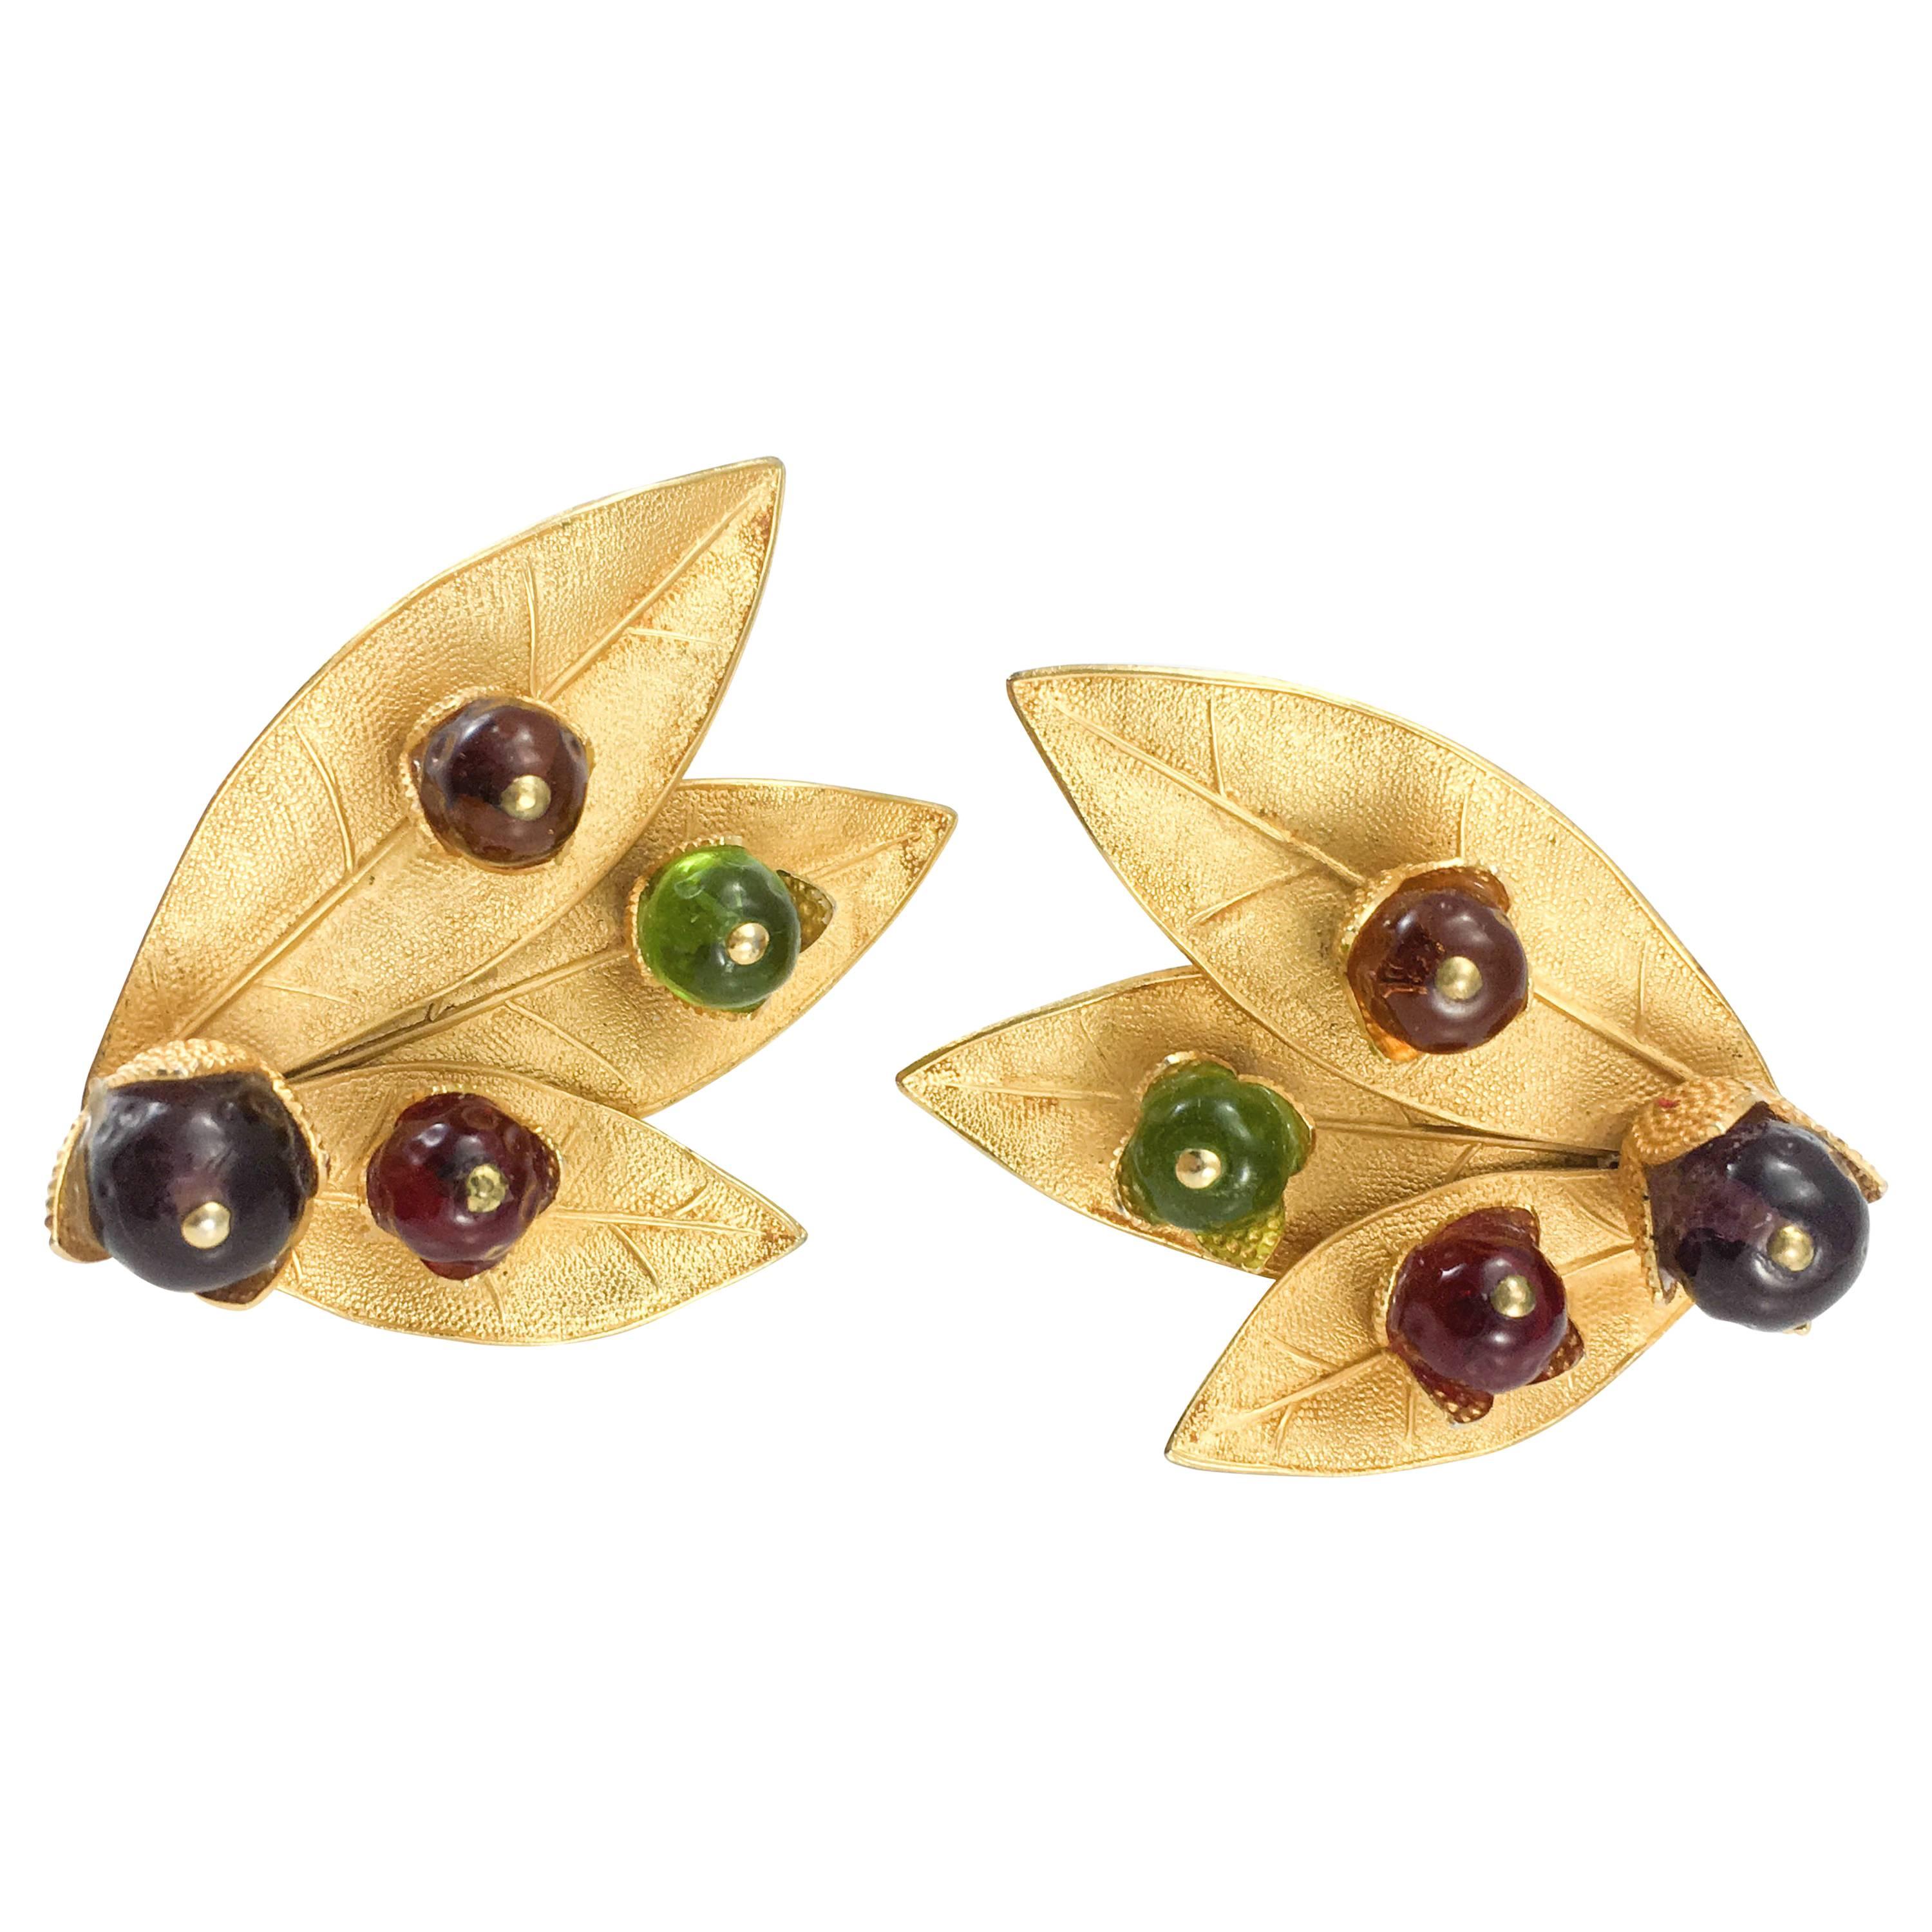 1980's Dominique Aurientis Gilt 'Leaf' Earrings With Colourful Resin Beads